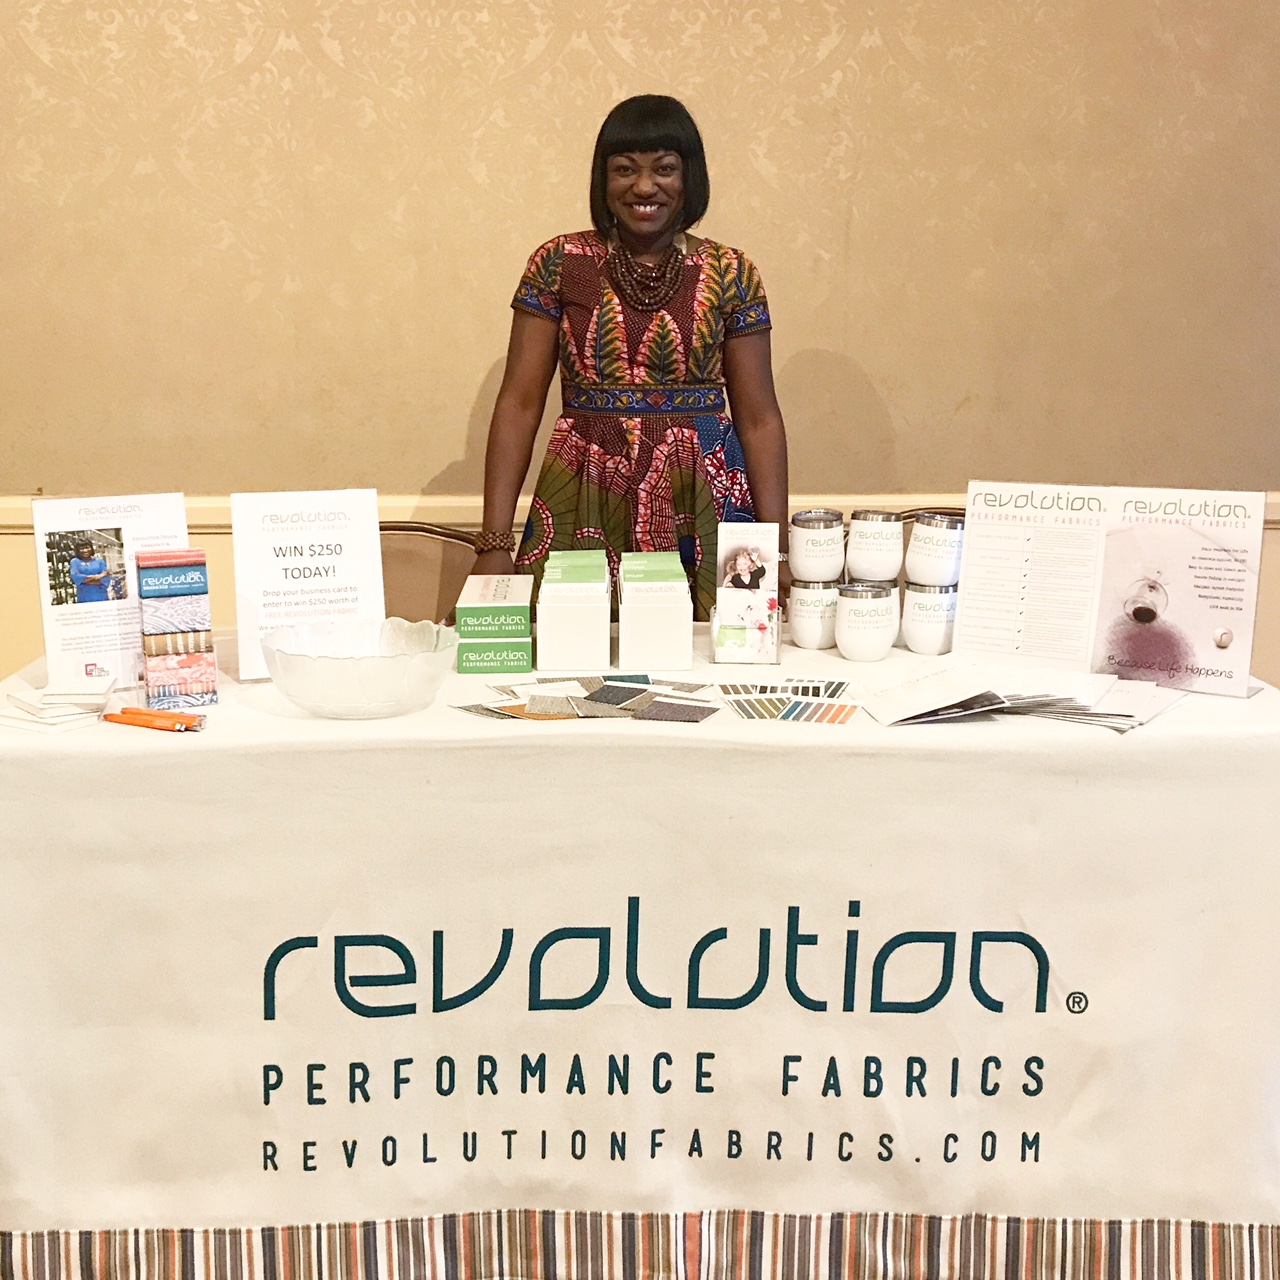 Revolution design ambassador, Cheryl Luckett, ready to share her experiences and knowledge of Revolution! To learn more about Cheryl, visit https://www.revolutionfabricsbytheyard.com/pages/design-ambassador   